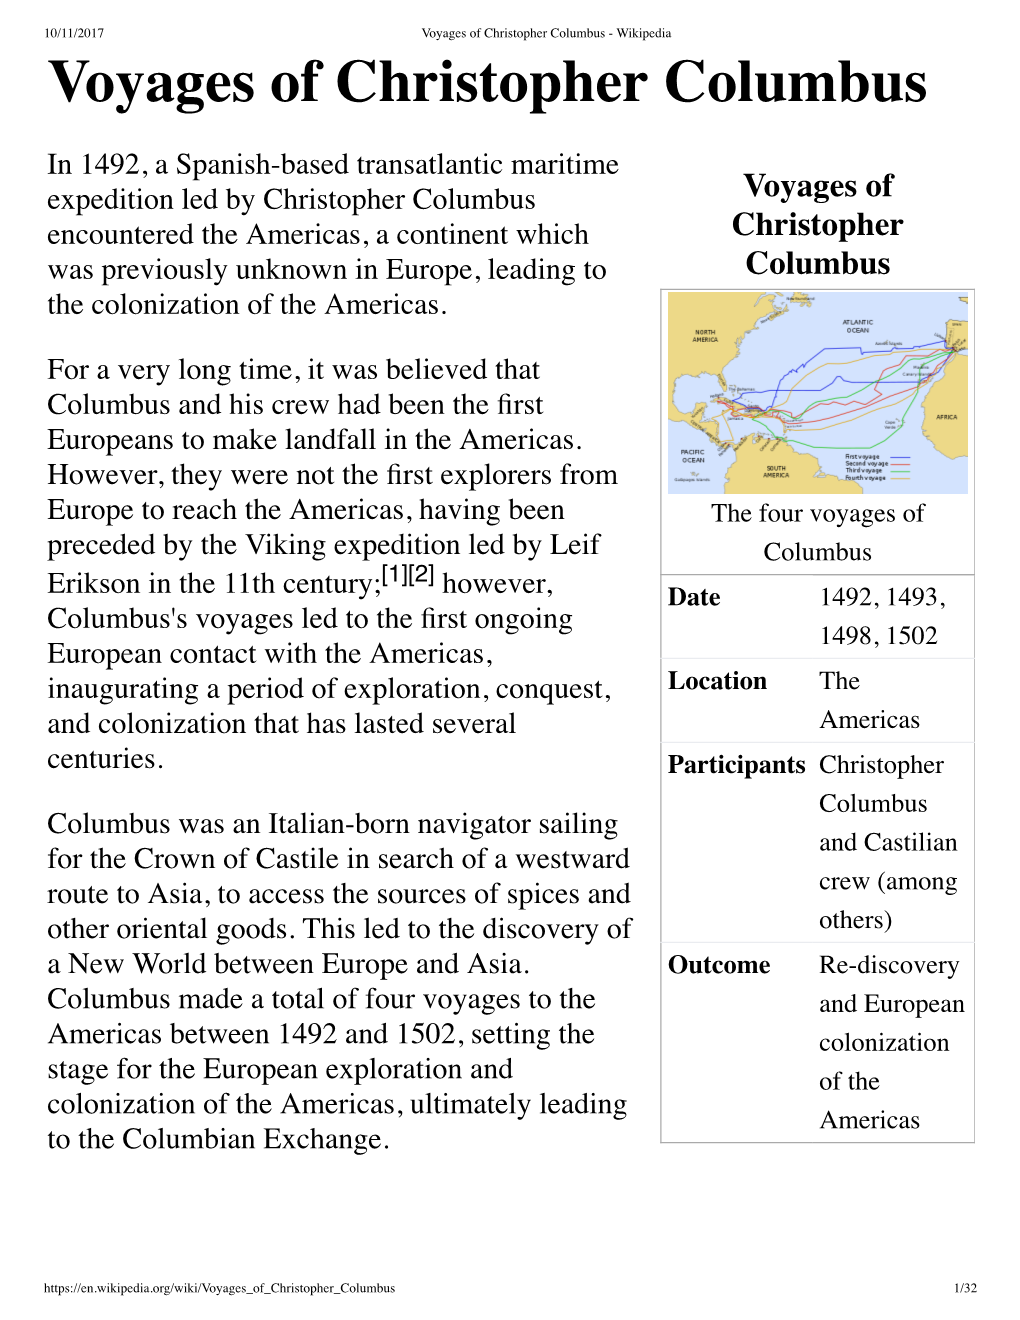 Voyages of Christopher Columbus - Wikipedia Voyages of Christopher Columbus